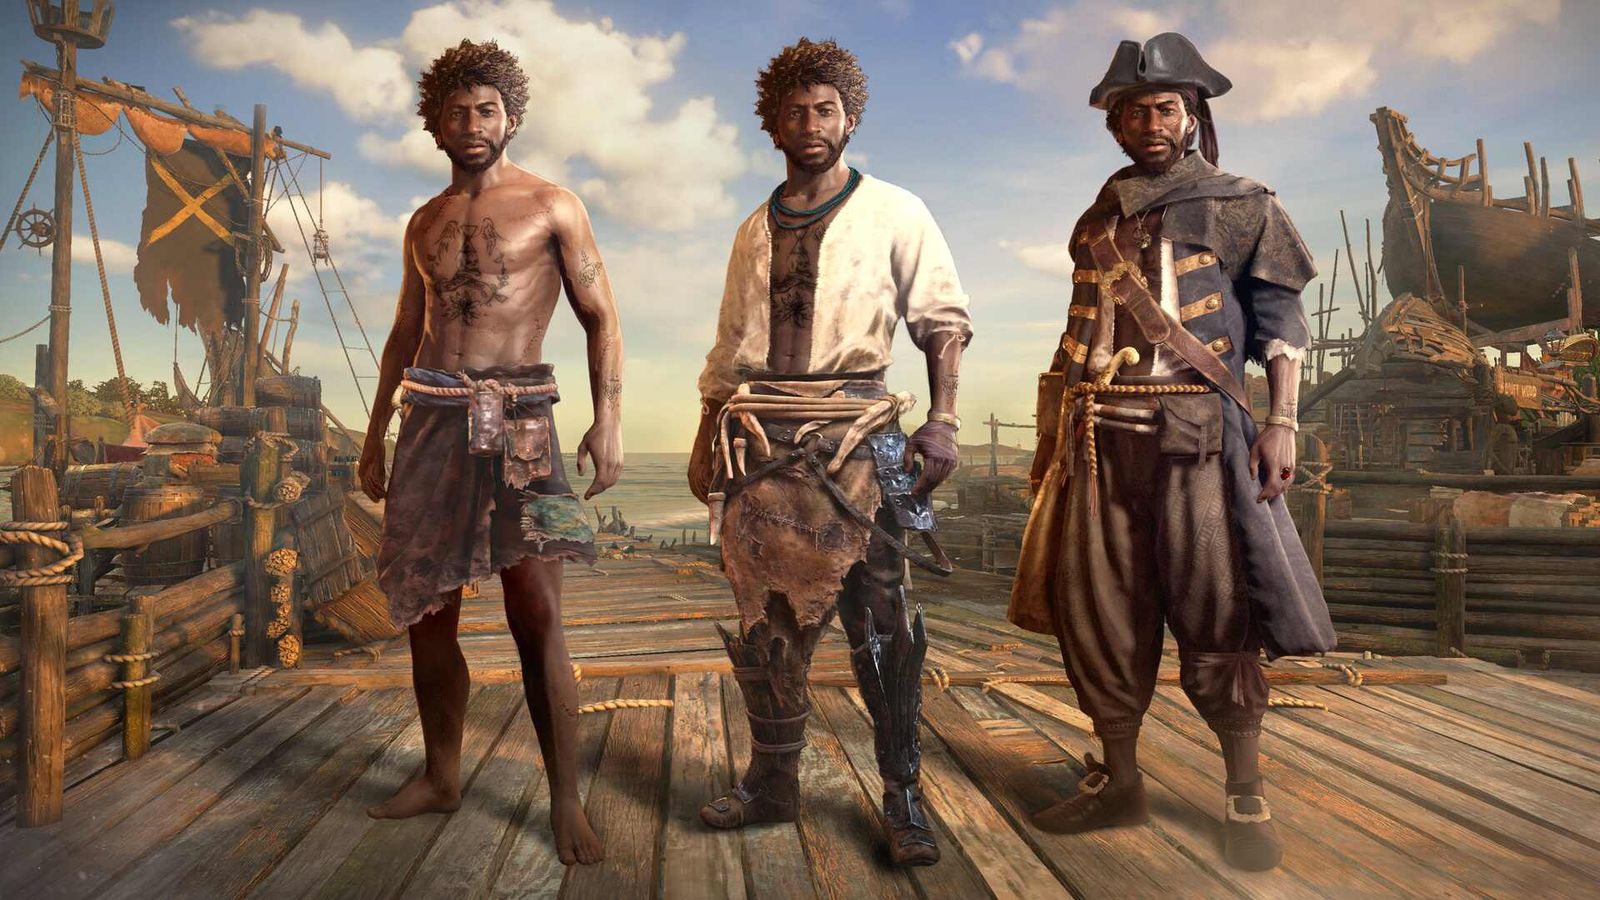 Copper - Three characters stand on a ship deck.